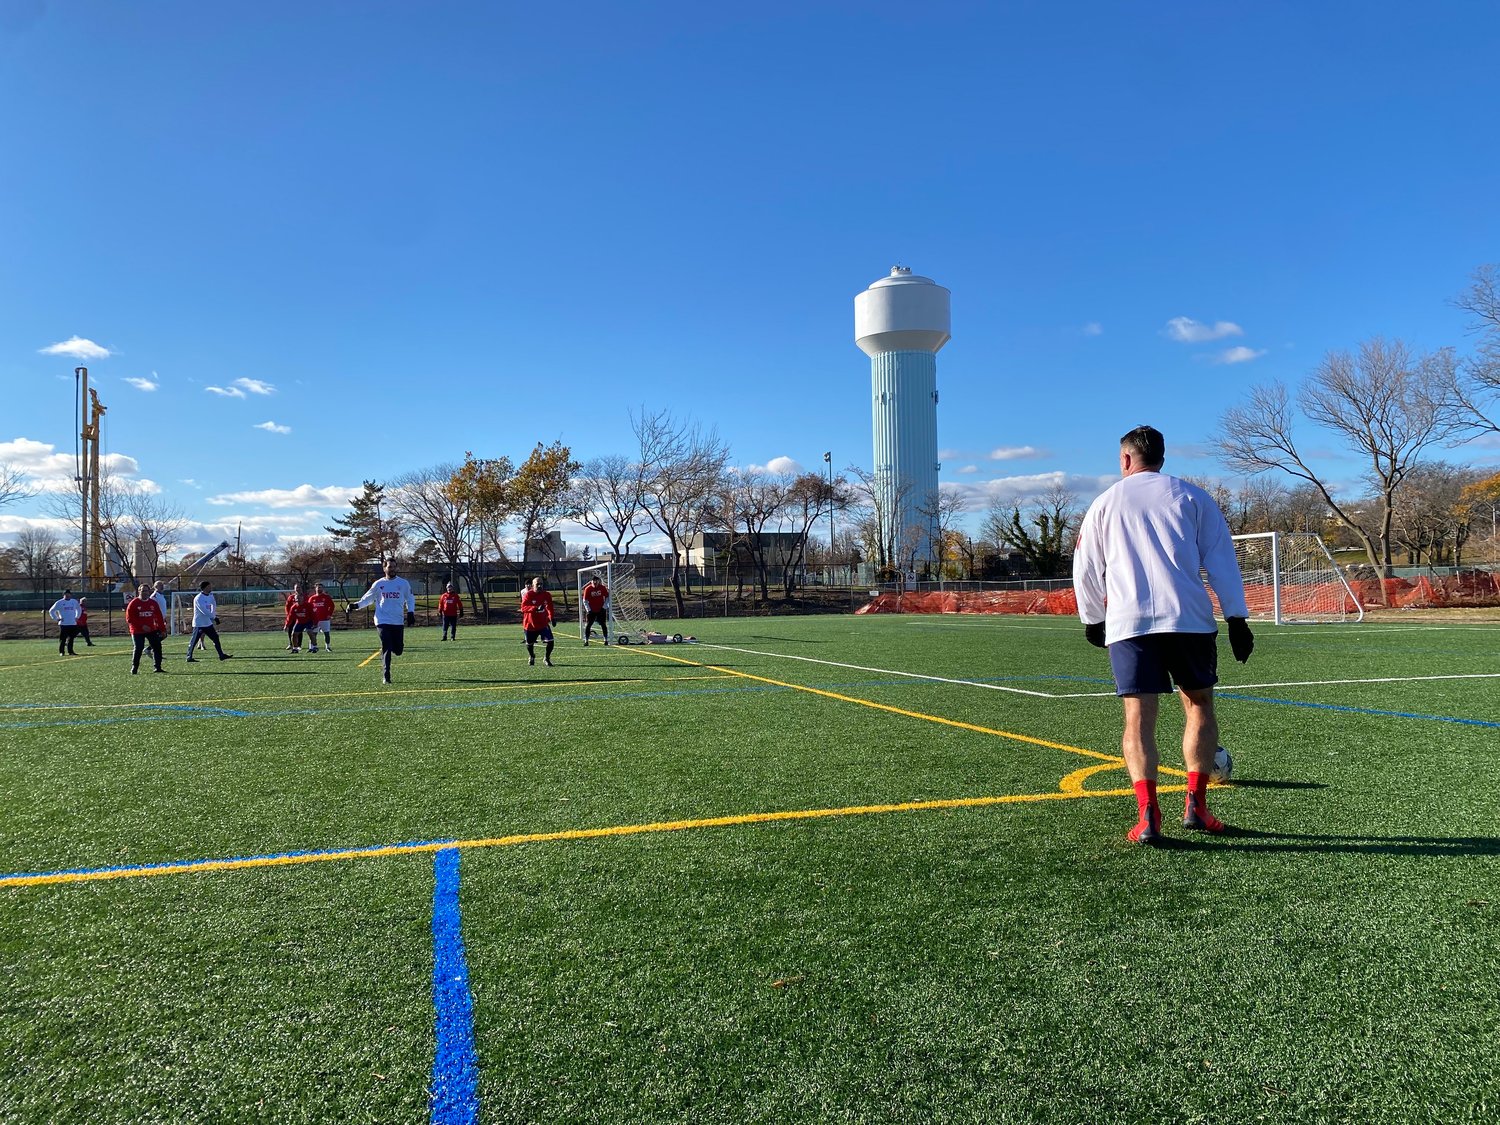 The Rockville centre Soccer Club men’s alumni game was held on the new turf at Tighe Field in the shadow of the water tower at Lister Field. The rededication was held in honor of the late Stephen Tighe.